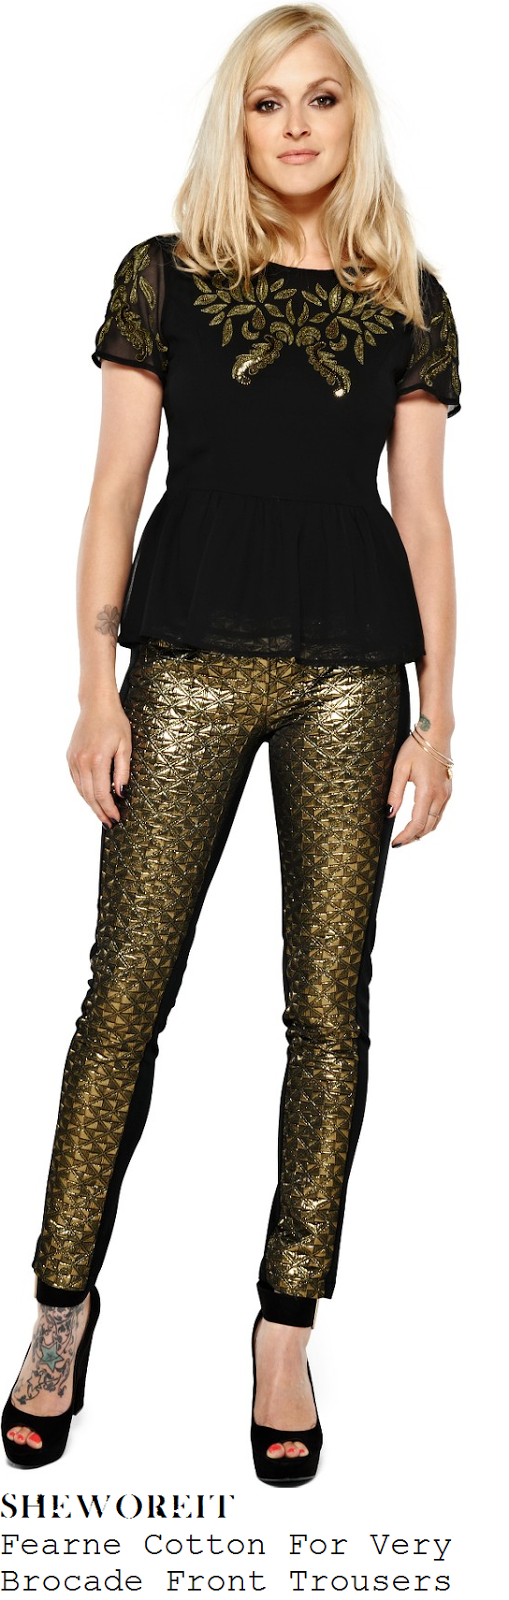 fearne-cotton-gold-brocade-diamond-quilted-panel-and-black-trousers-radio-one